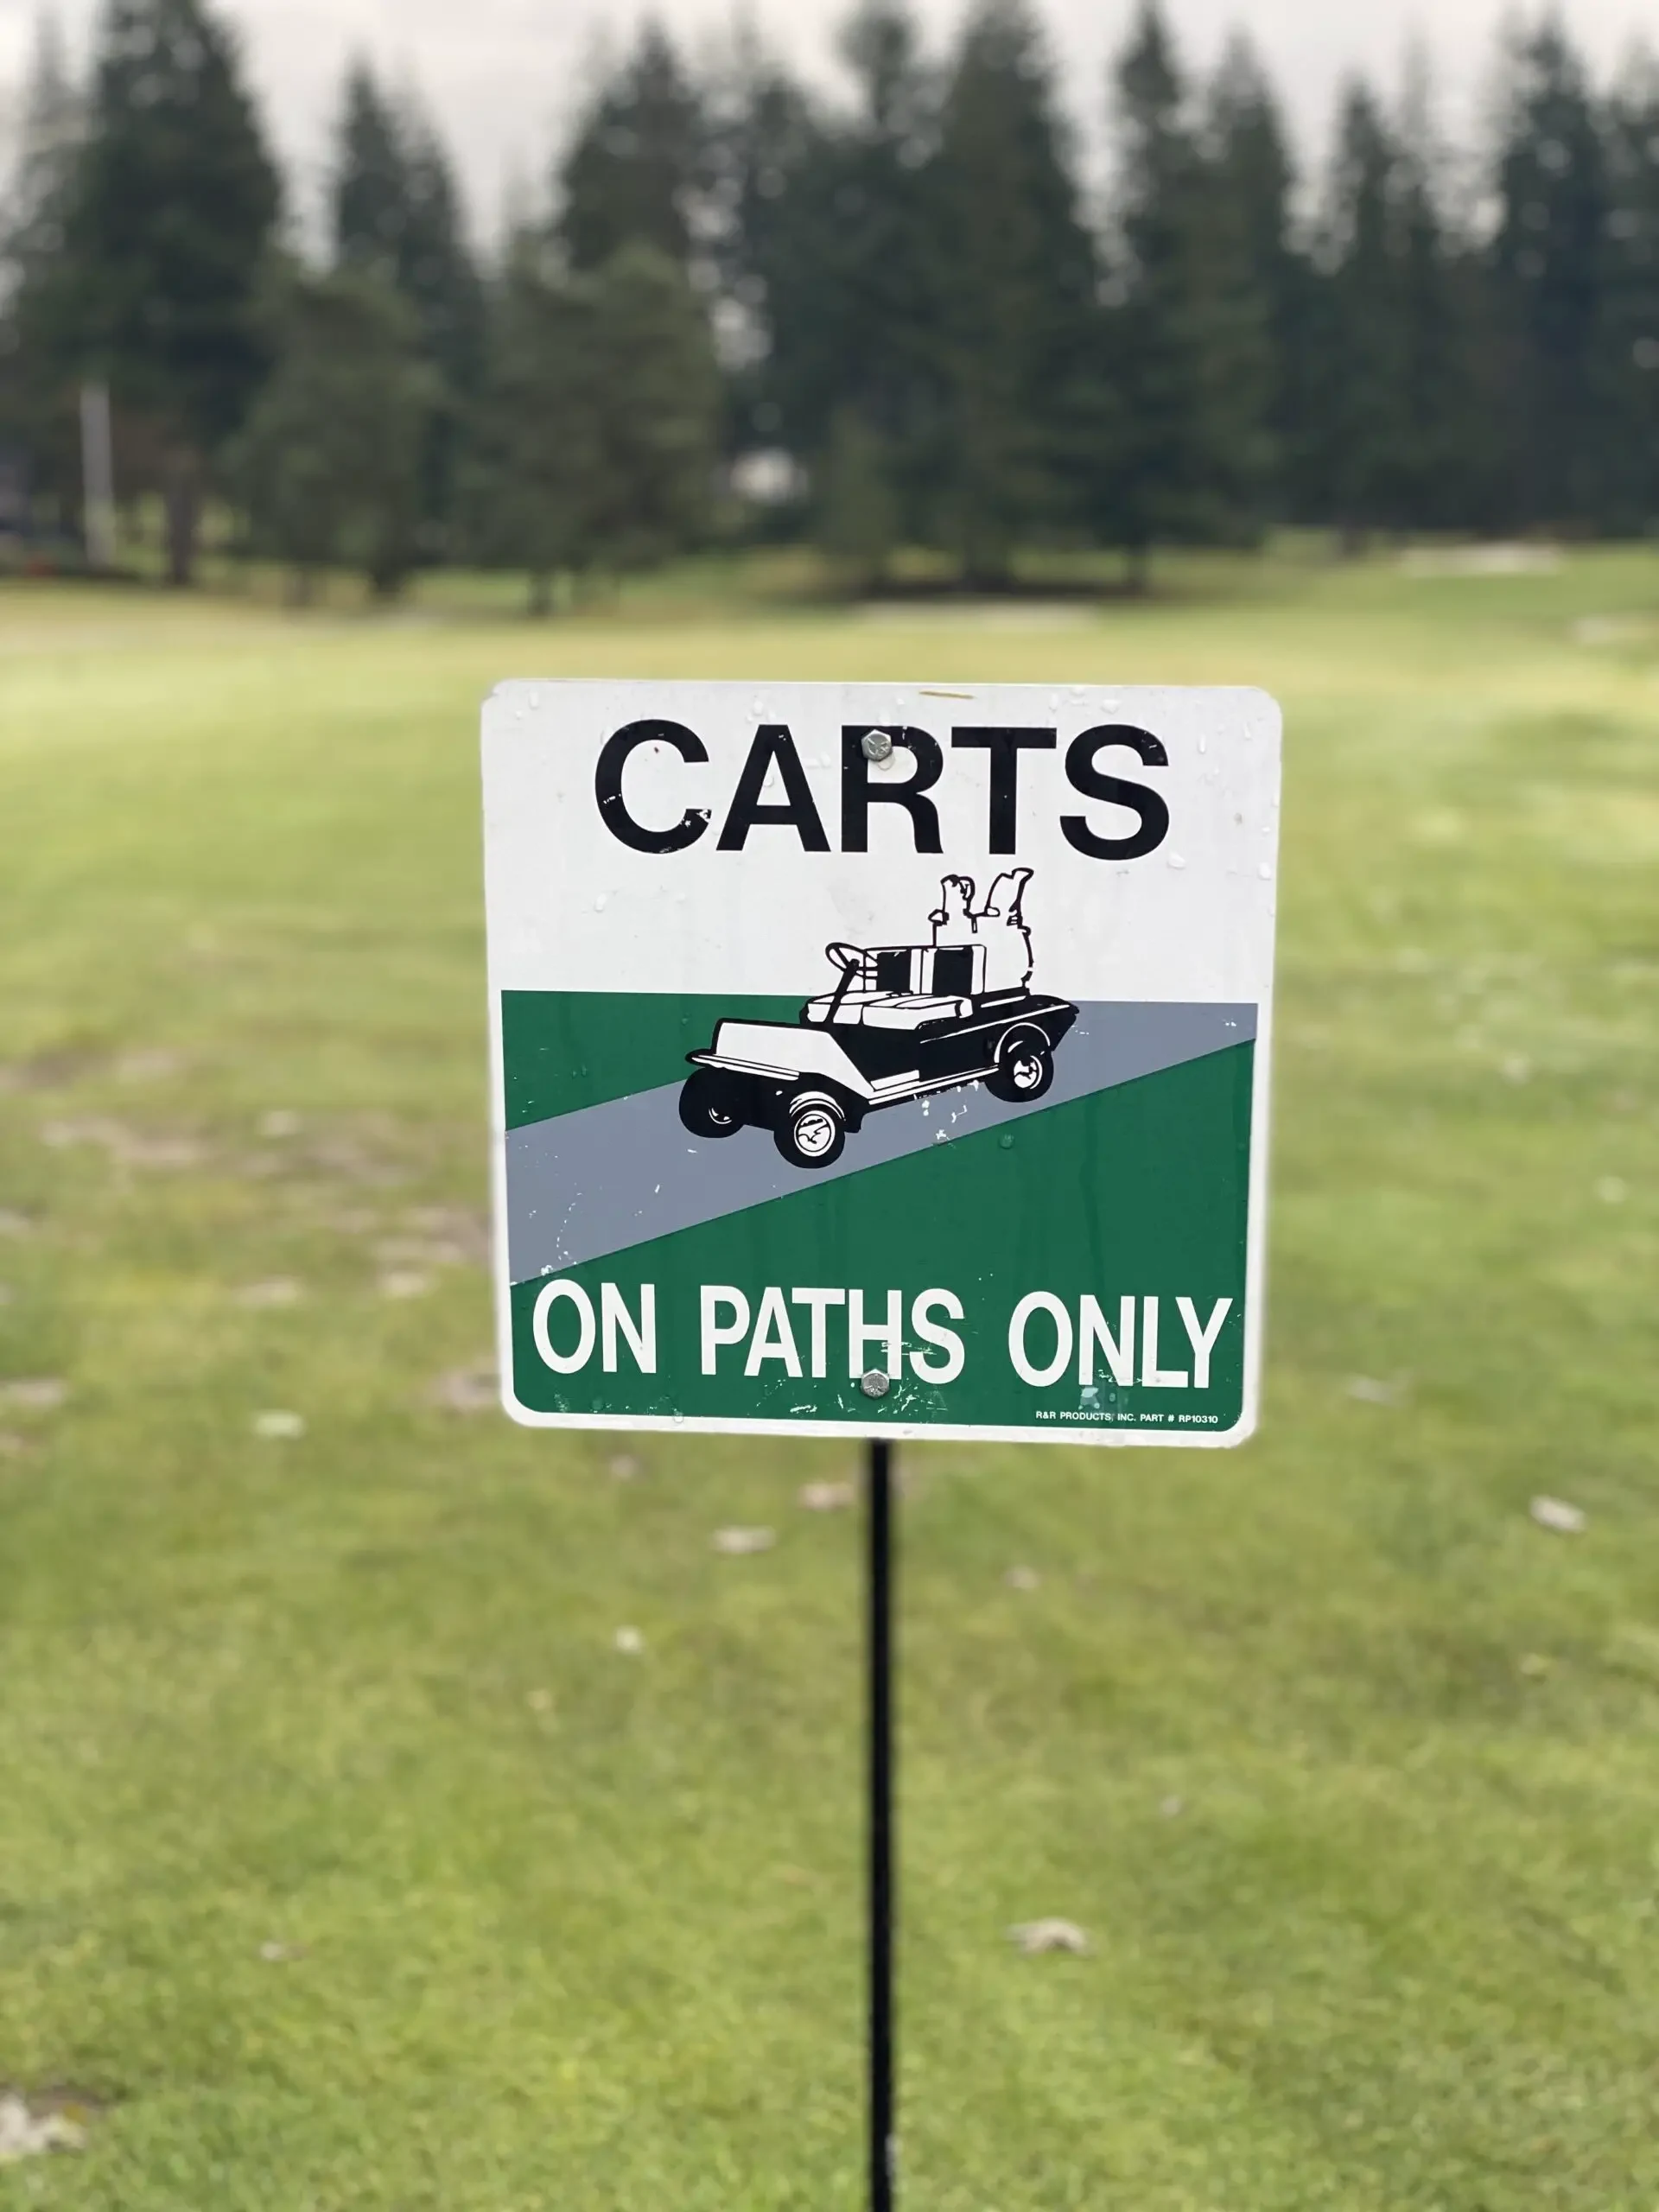 why do courses use cart path only?